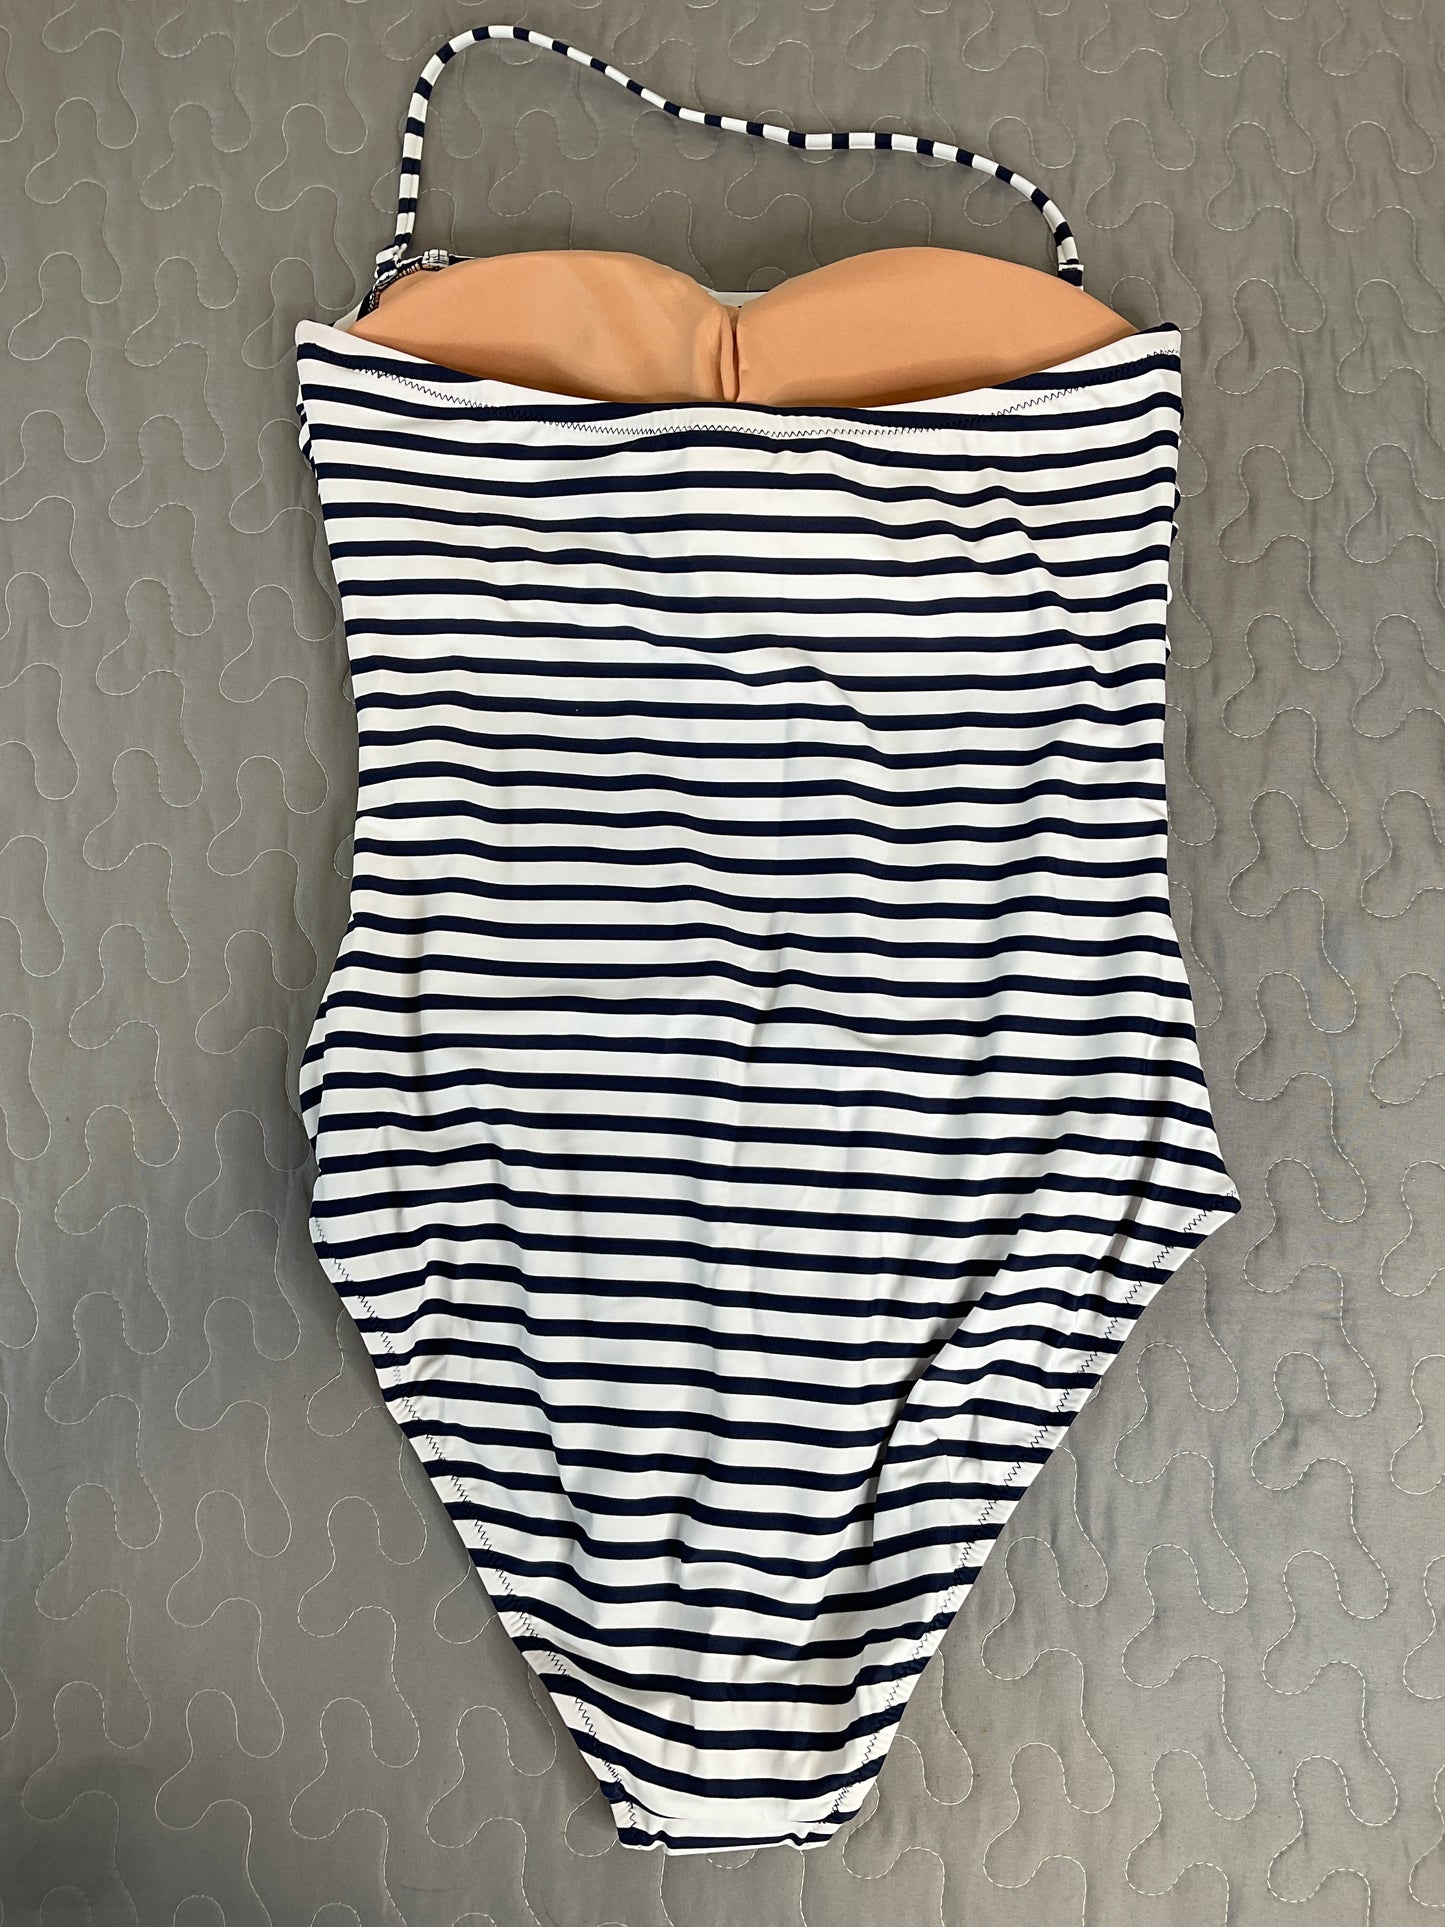 J. Crew Womens Striped Ruche Swimsuit One-Piece, Size 10